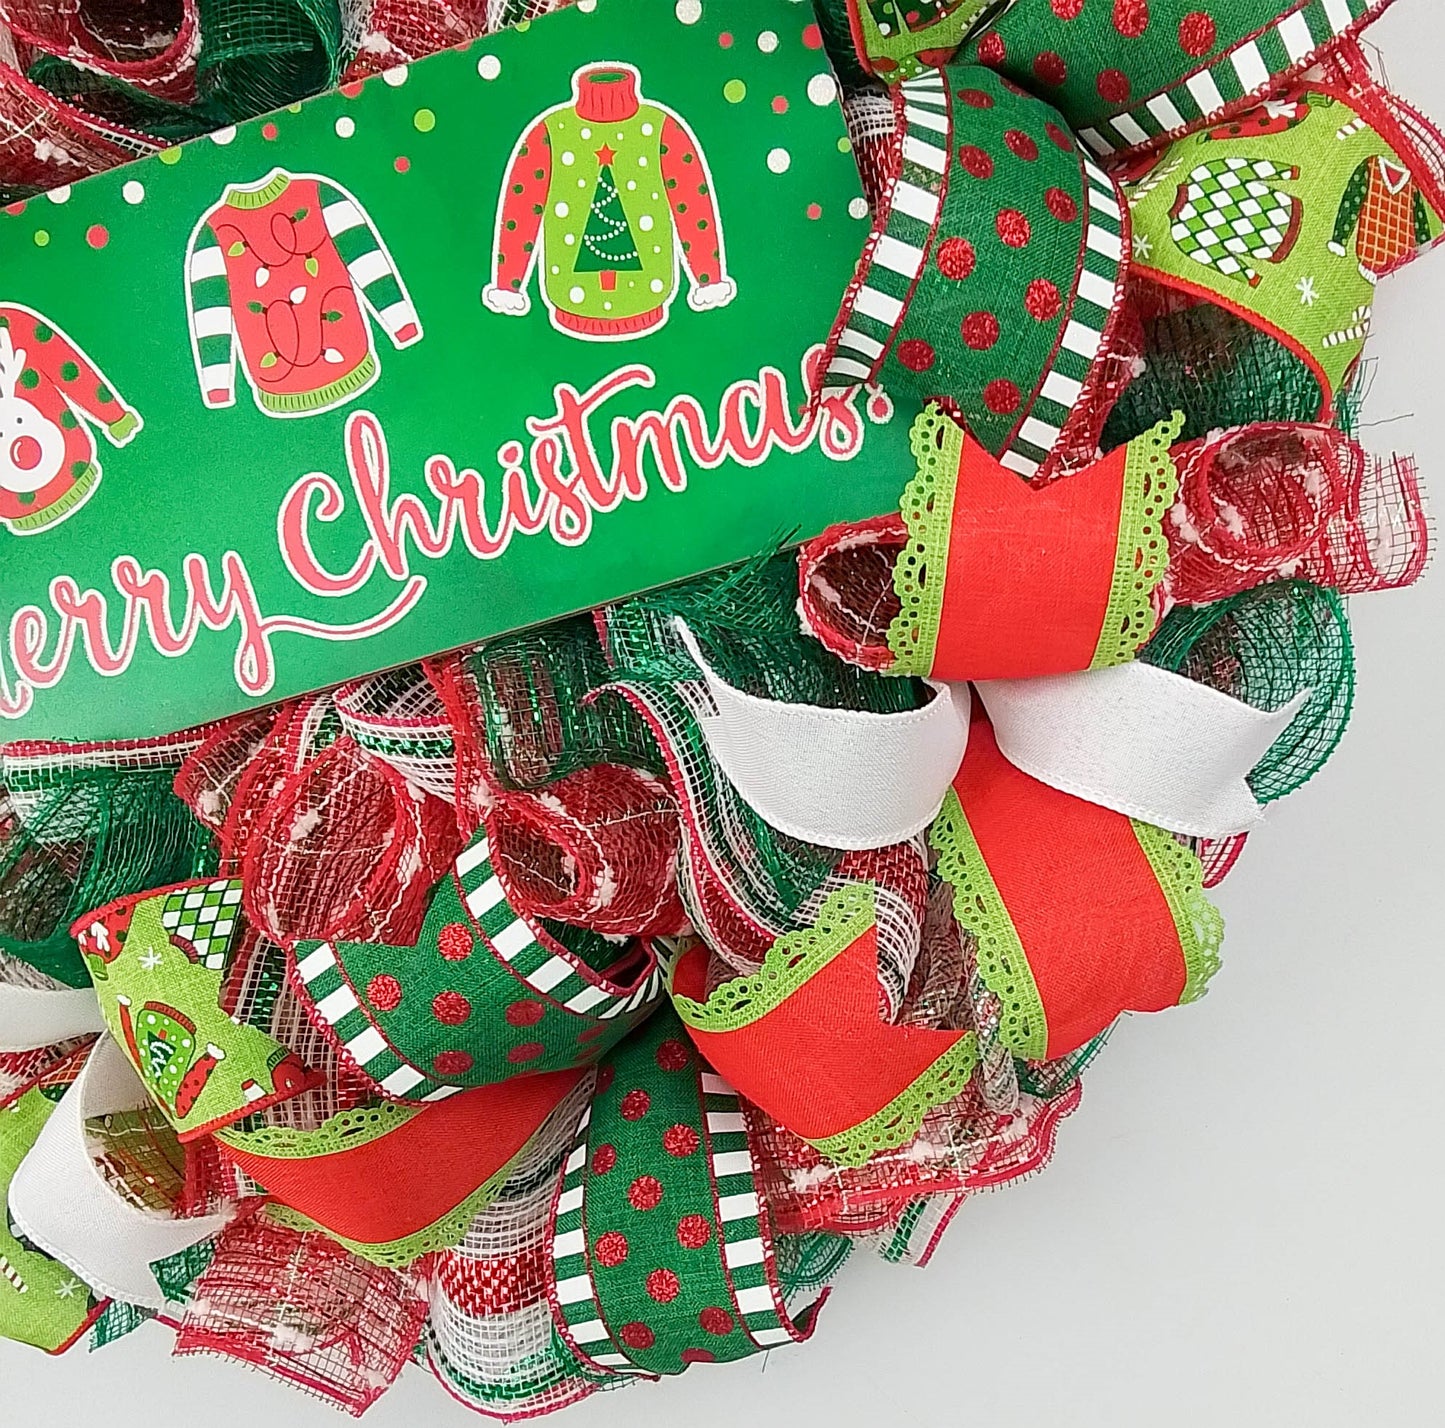 Ugly Christmas Sweater Wreath - Xmas Mesh Door Decor - Holiday Decorations - Red White Emerald Green